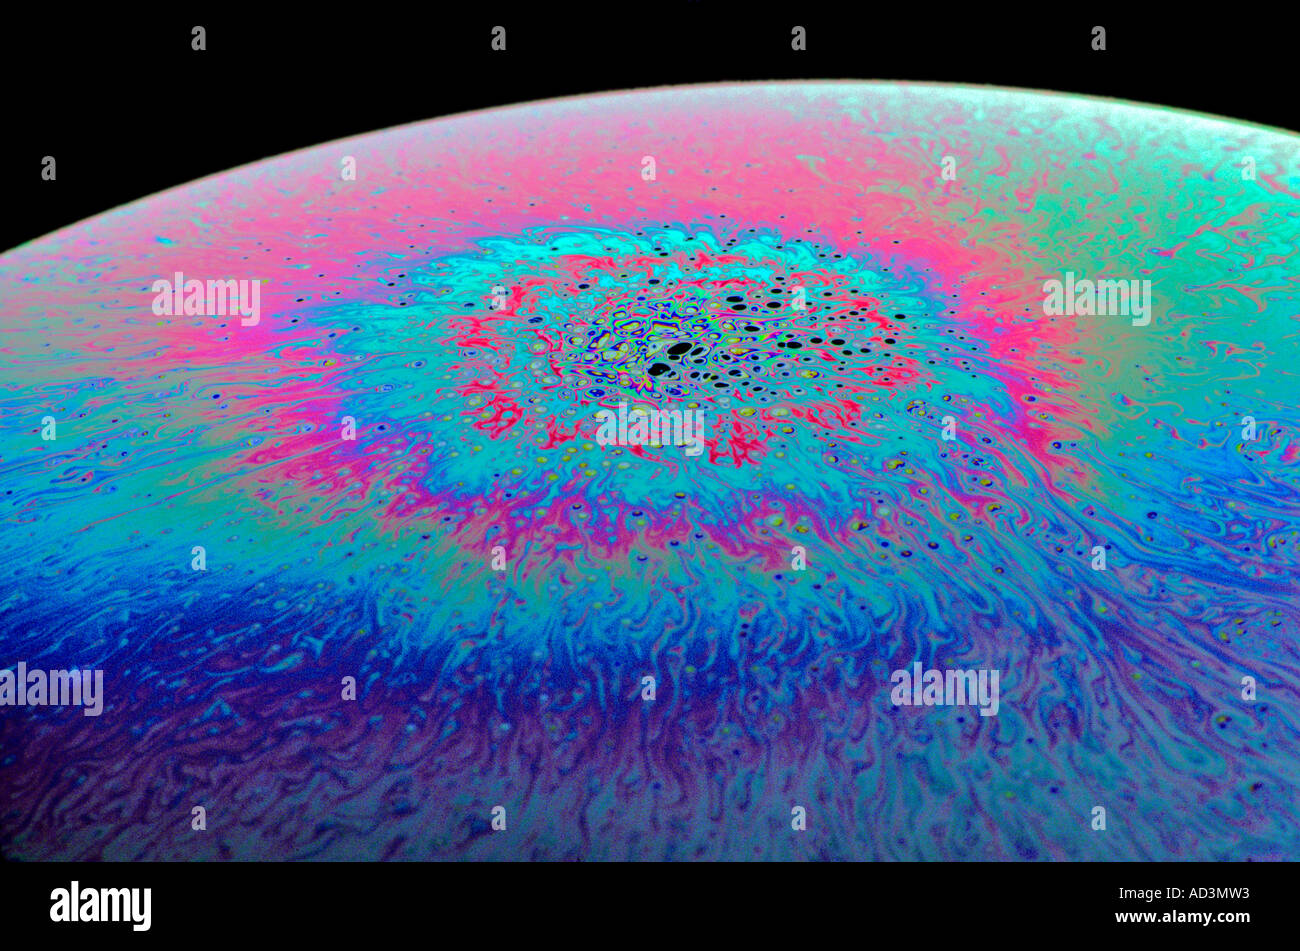 Iridescent Colors of Soap Bubbles are Caused by Interfering Light Waves Stock Photo